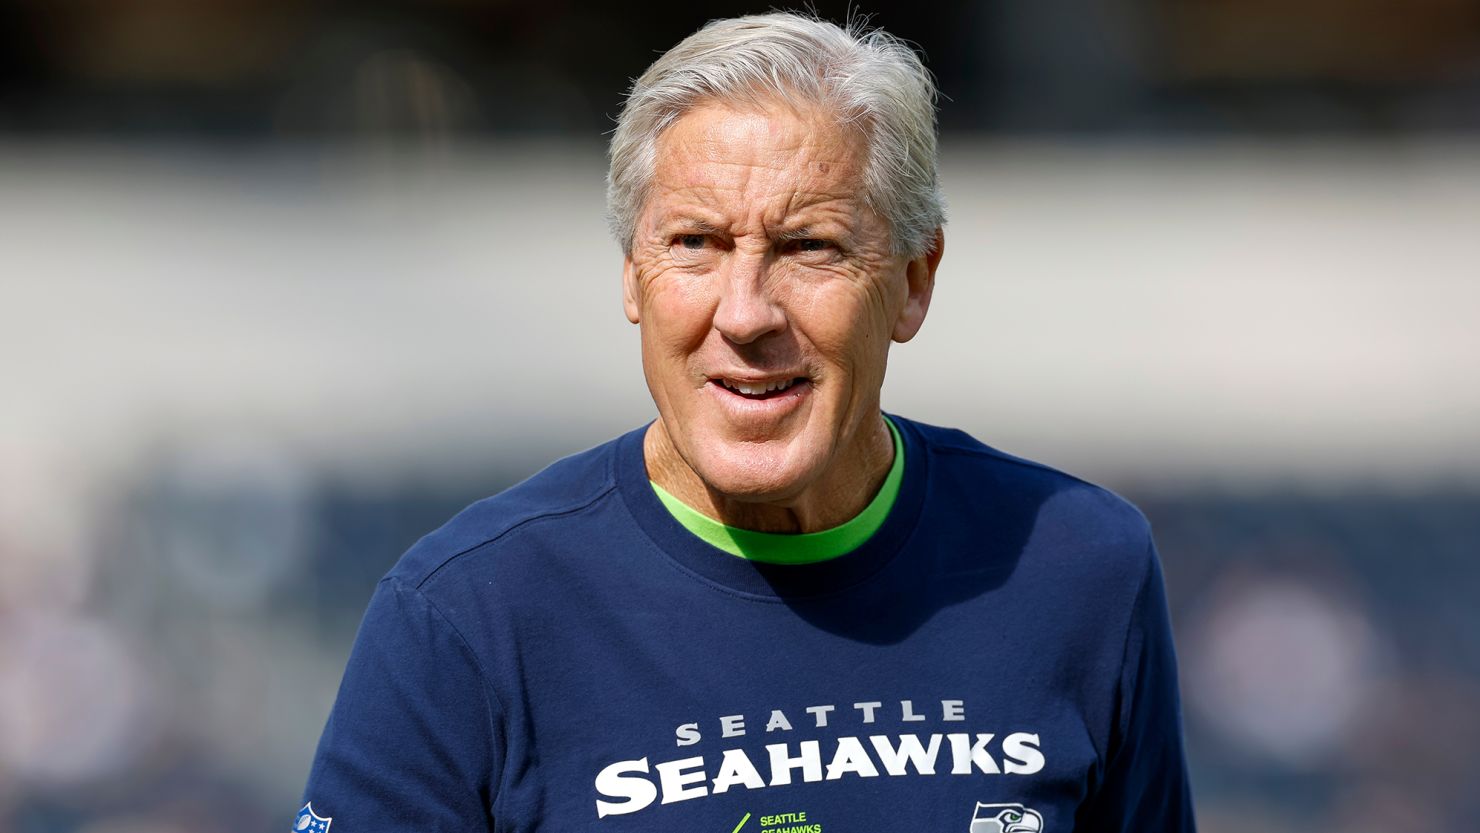 The Coaching Carousel Could Pete Carroll Be the 49ers' Next Defensive Mastermind